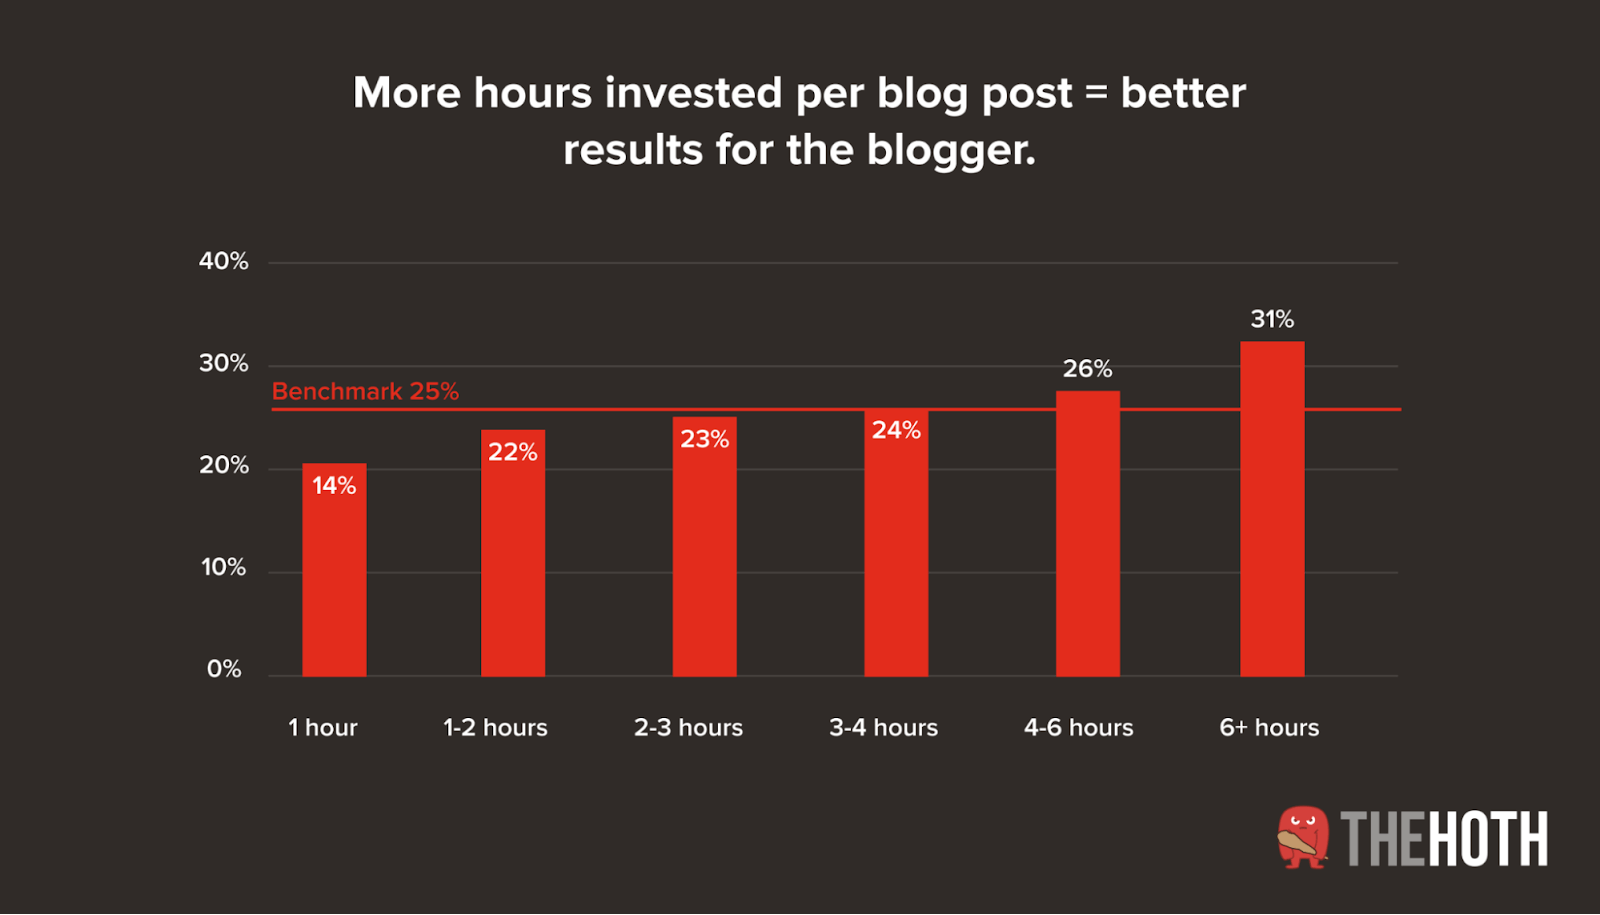 More hours per blog post means better results